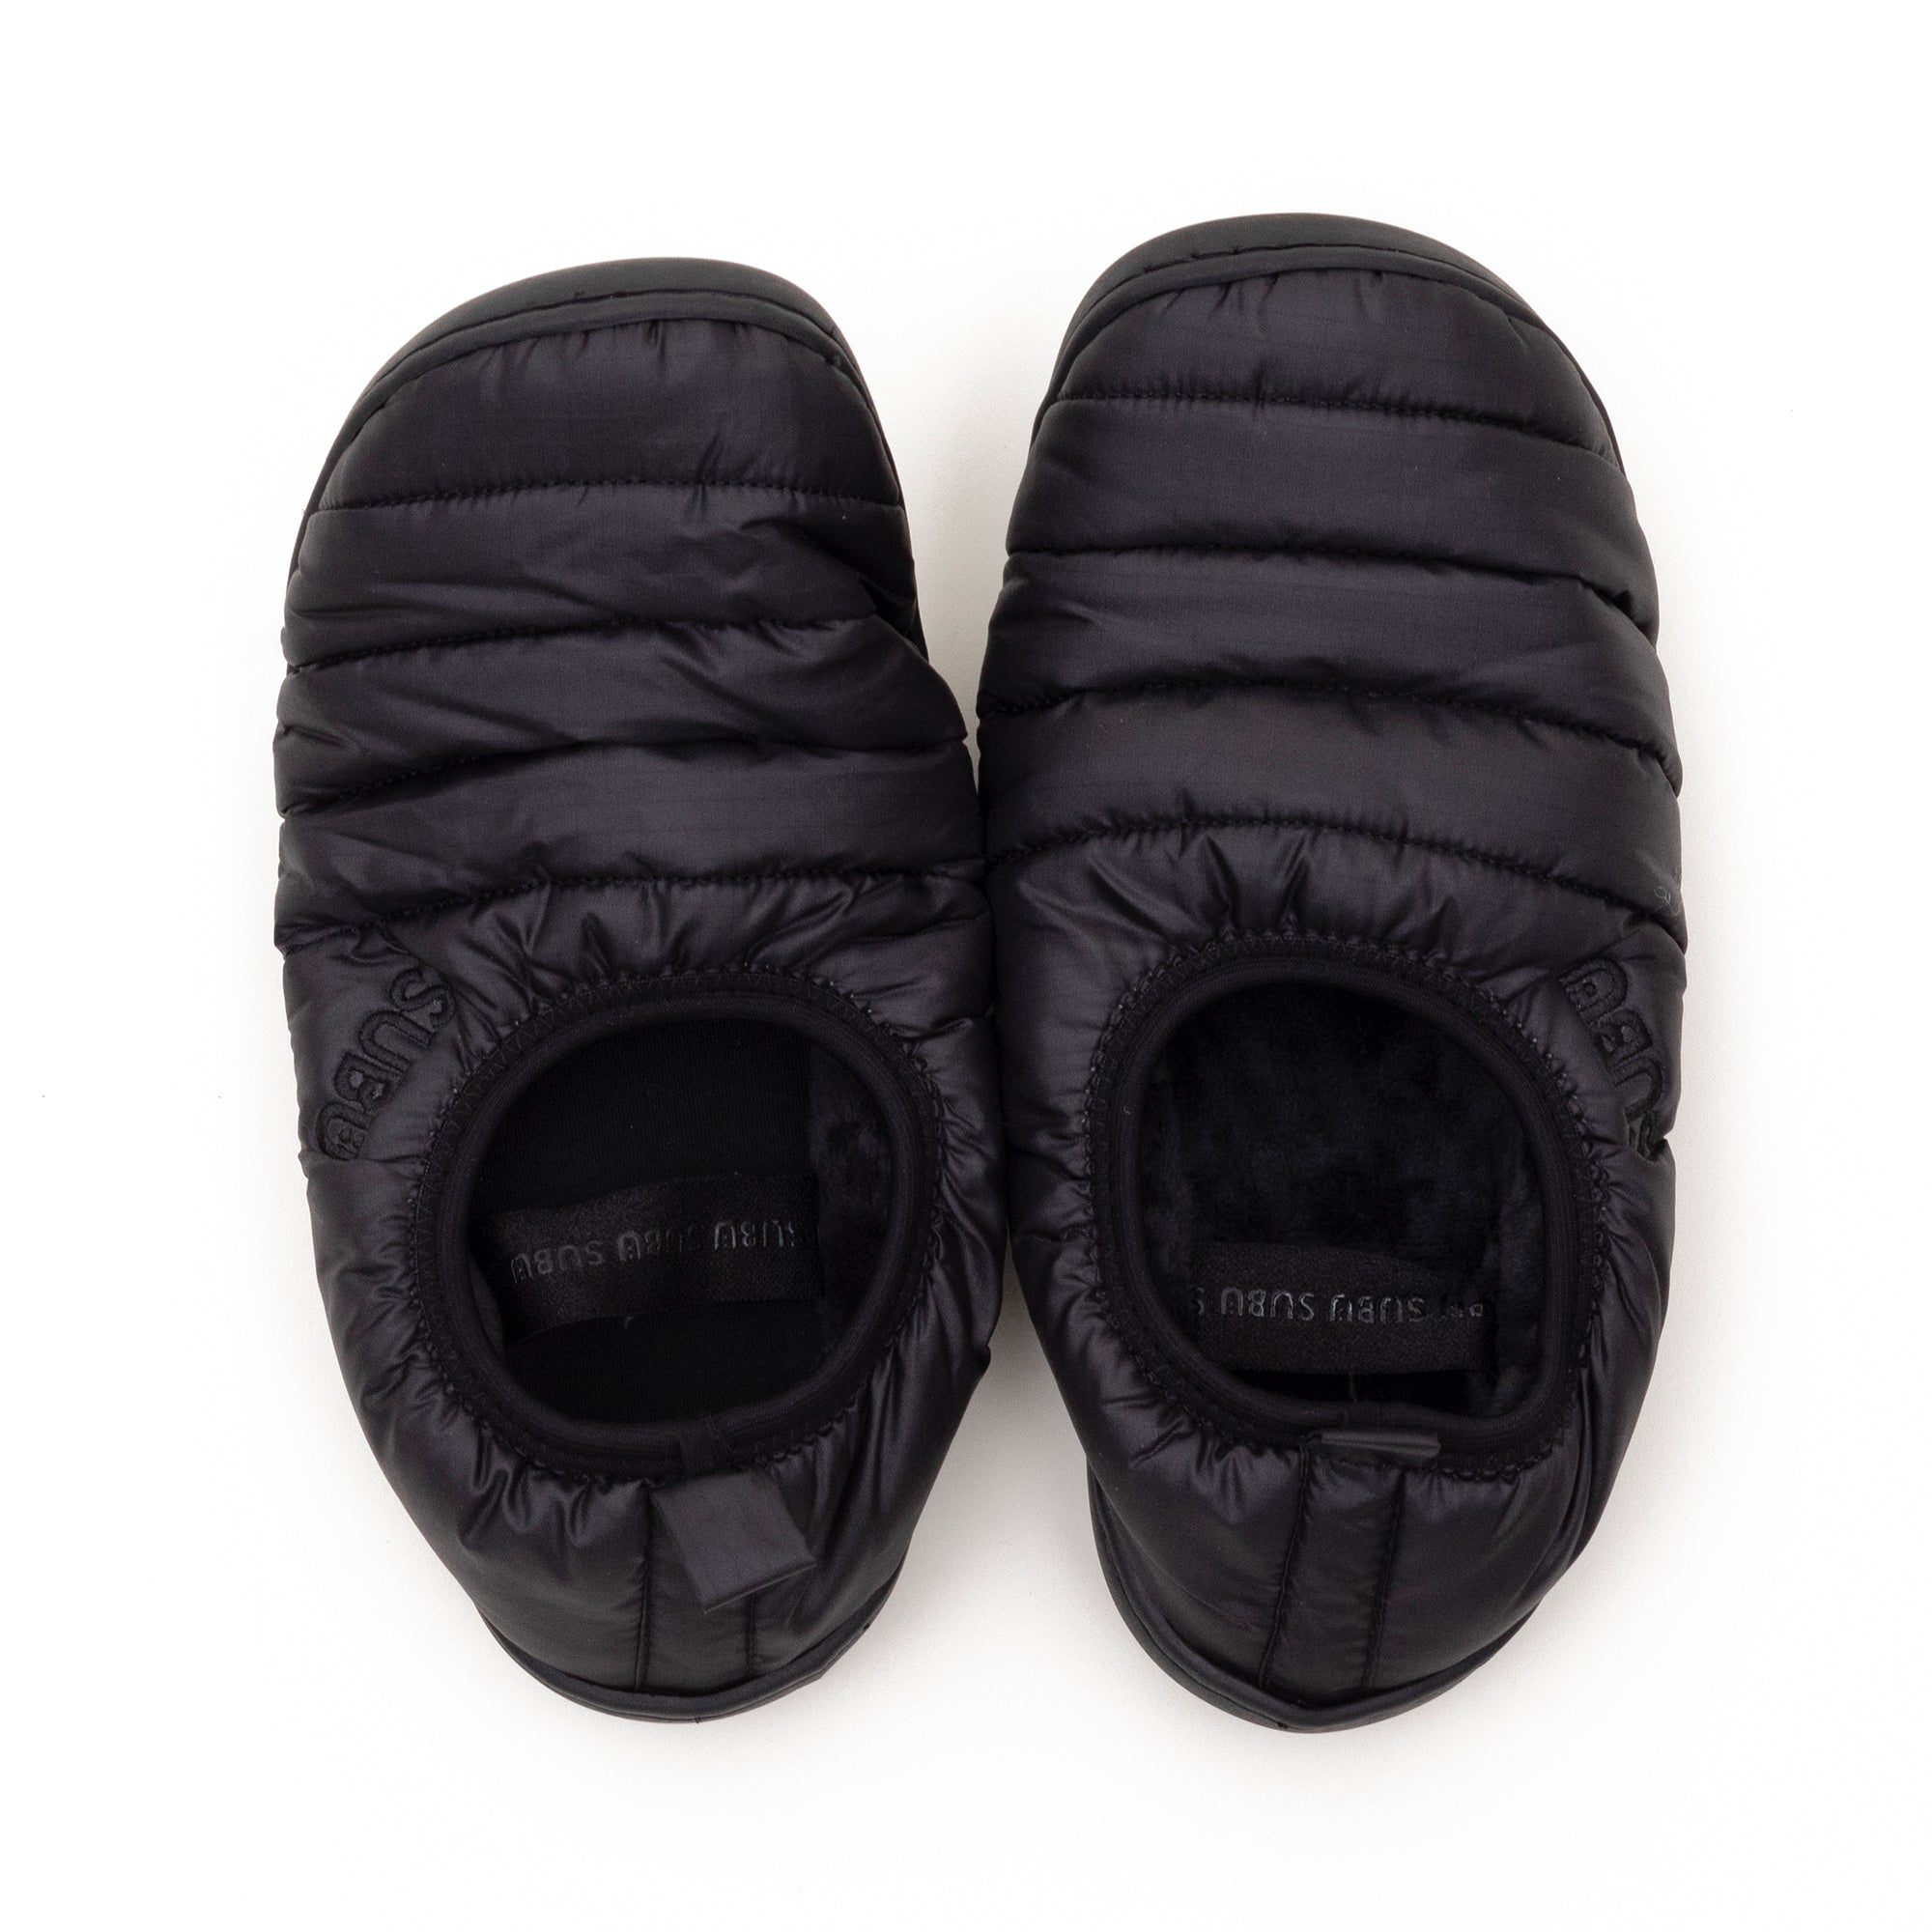 Subu Packable Slippers - Gloss Black